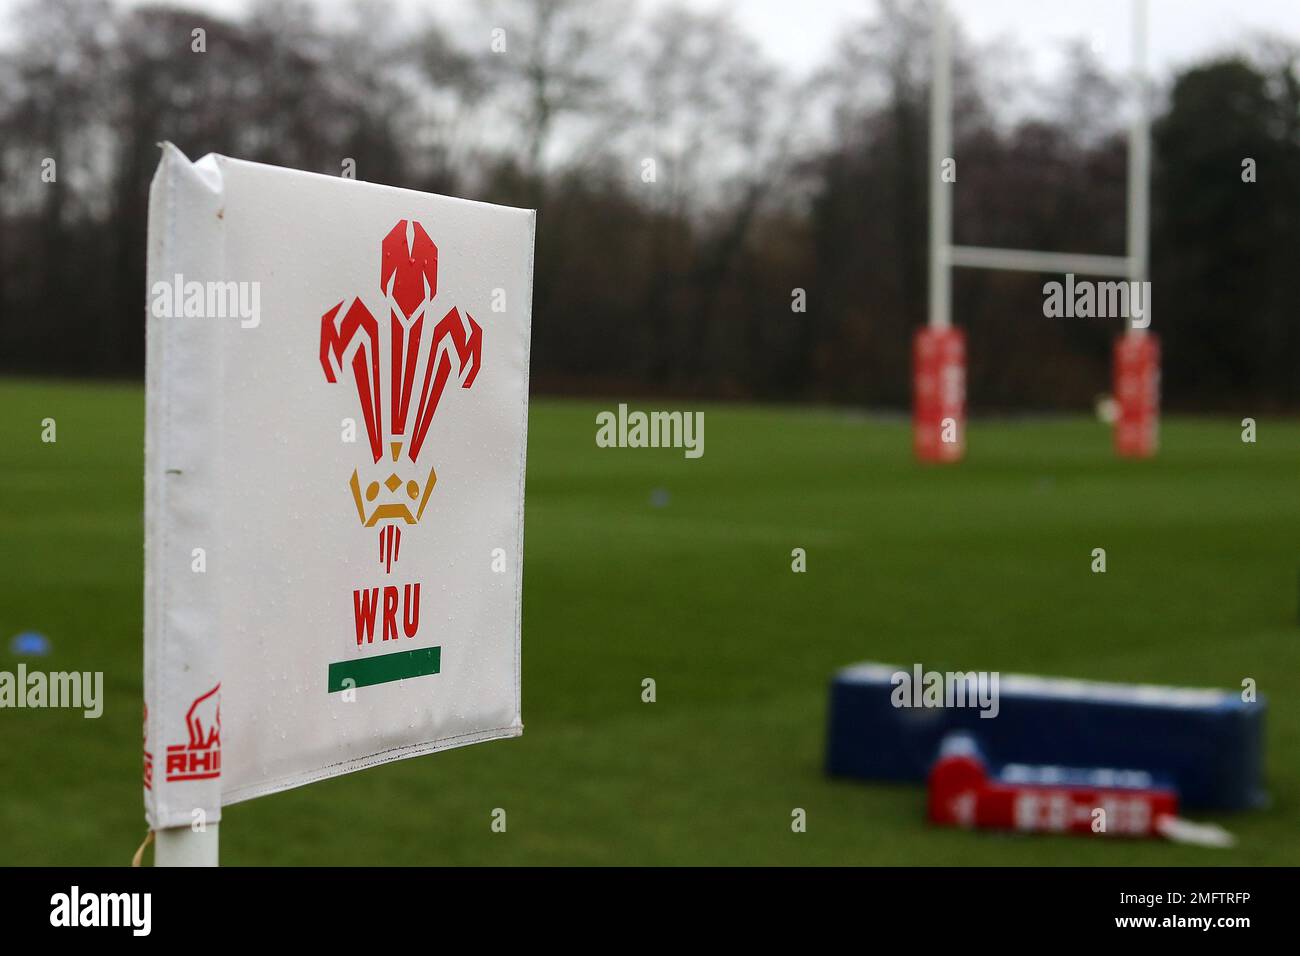 Cardiff, UK. 25th Jan, 2023. A general view of the WRU, Welsh Rugby Union logo on a touchline flag during the Wales rugby training session, Vale of Glamorgan on Wednesday 25th January 2023. The team are preparing for this years Guinness Six nations championship . pic by Andrew Orchard/Andrew Orchard sports photography/ Alamy Live News Credit: Andrew Orchard sports photography/Alamy Live News Stock Photo